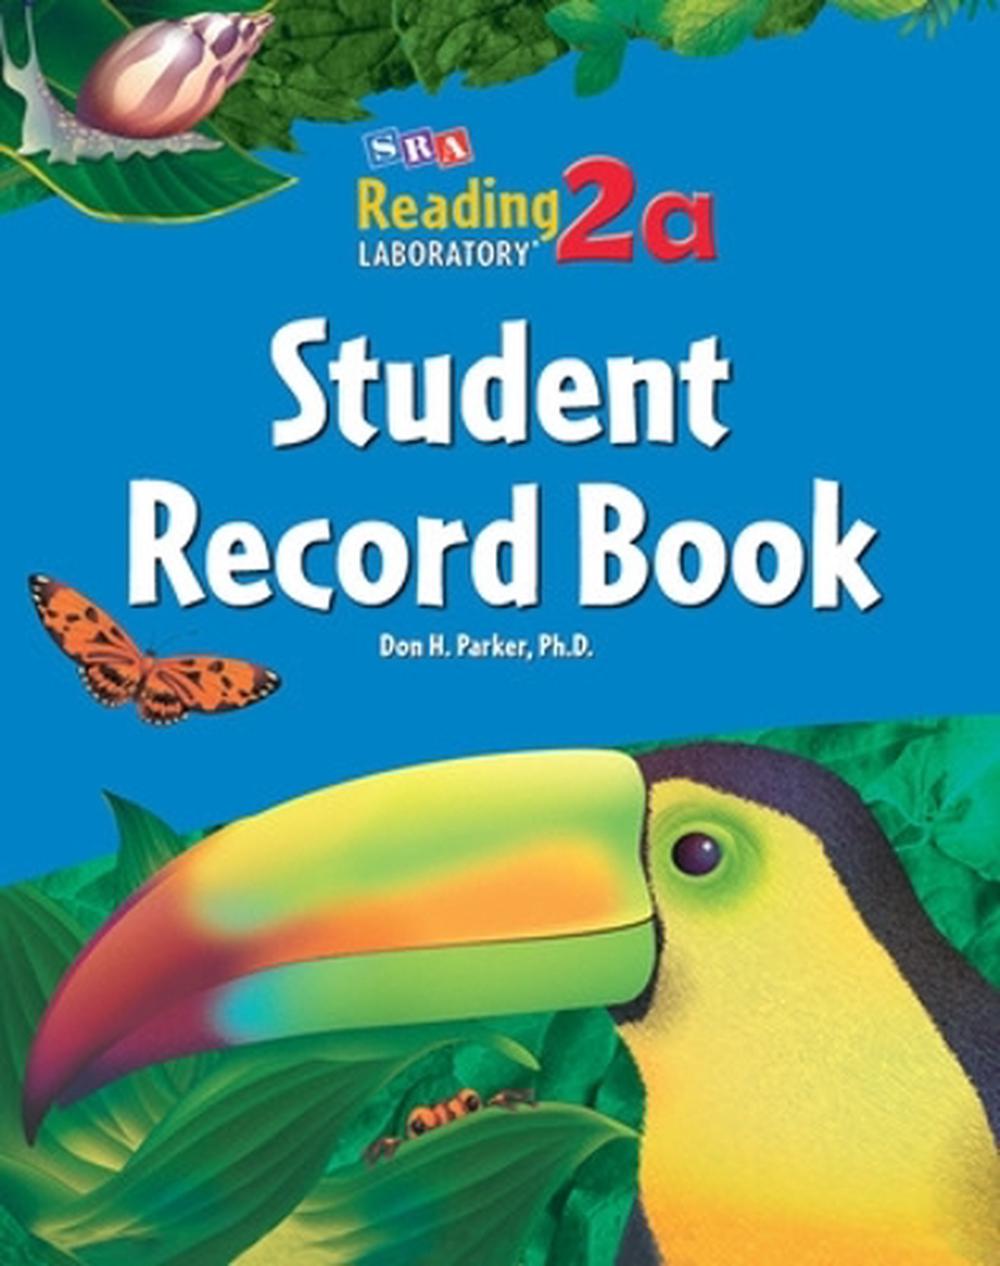 Reading Lab 2a, Student Record Book (5pack), Levels 2.0 7.0 by Sra